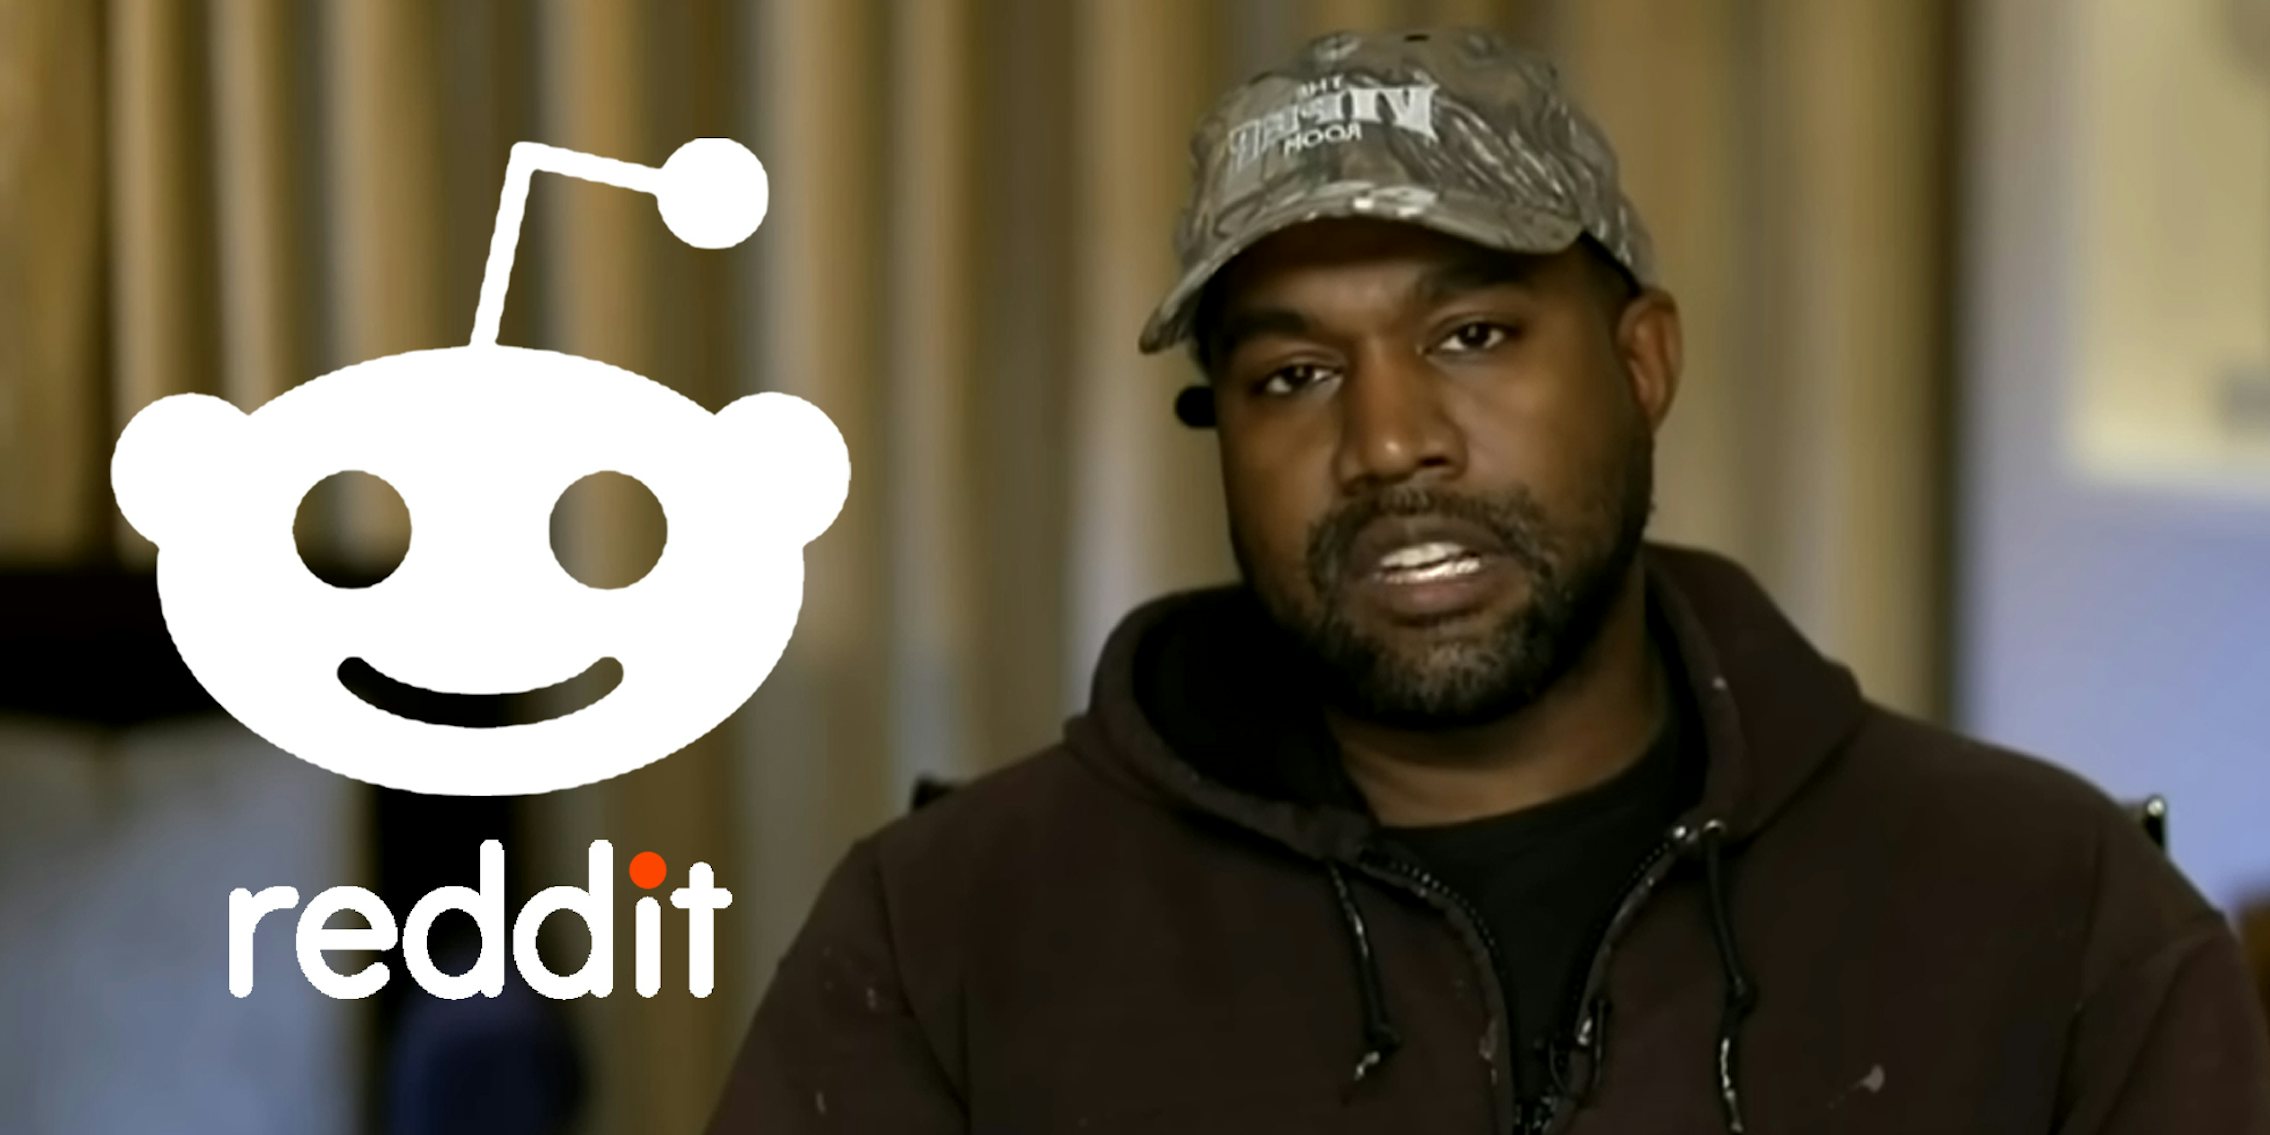 Kanye West speaking with Reddit logo to his left